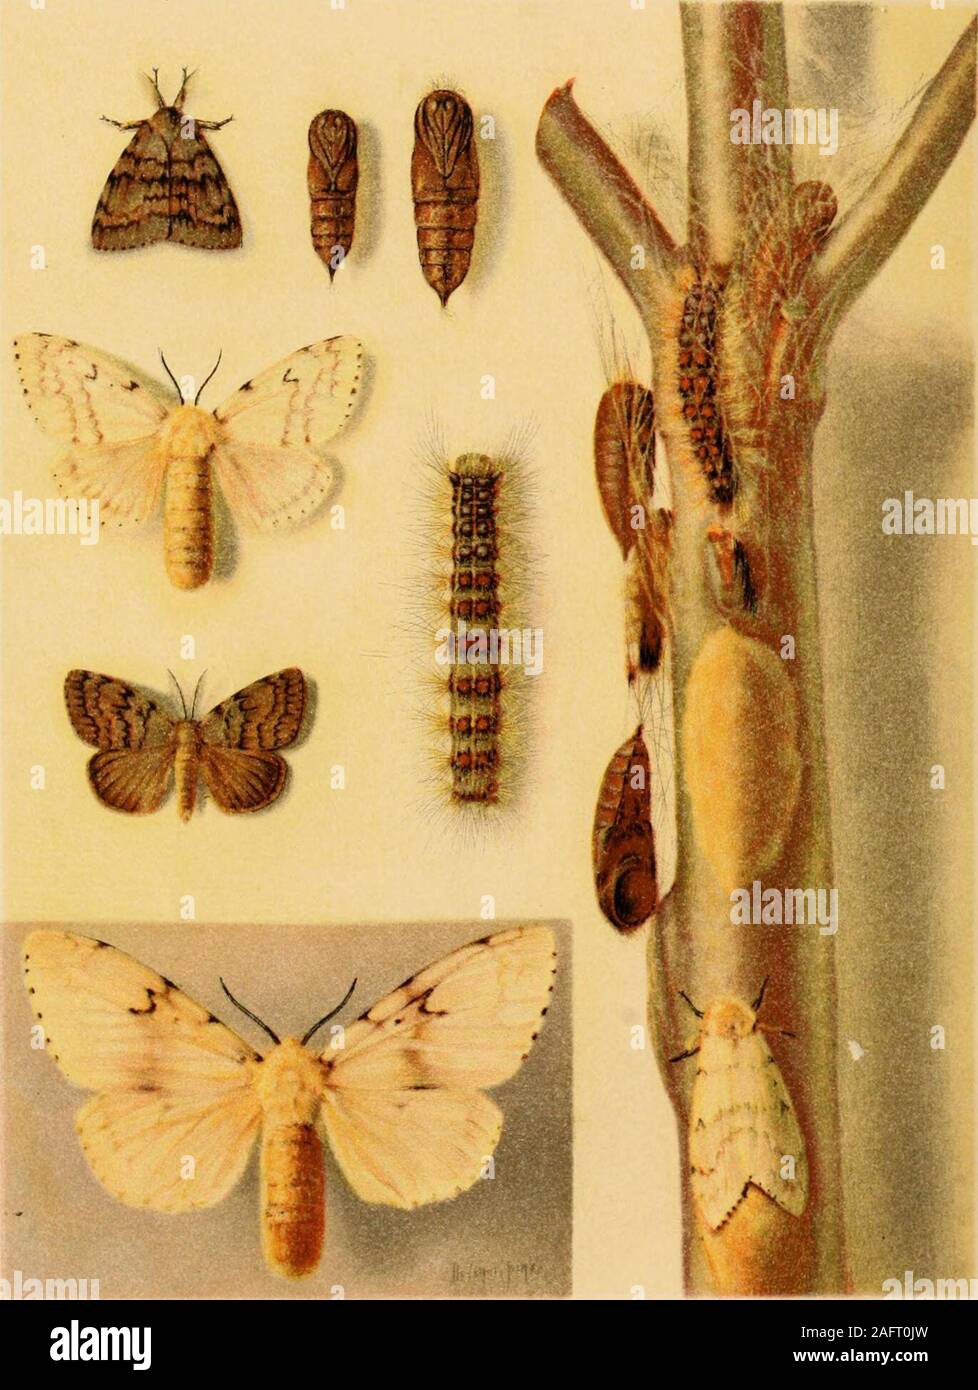 . A manual of dangerous insects likely to be introduced in the United States through importations. sativum).White ash (see Schizomeria ovata).Whitethorn (see Mespihis spp.). Whortleberry ( Vaccinium spp.) 20 Wild fruits 112,116 Willow (see Salix spp.). Yams 122 Yew (see Taxus spp.). Zea mays (corn, maize) 6,84, 85,122,123,135,142,1S9,197,200,203,208,214 o LIBRARY OF CONGRESS 0 002 831407 3 . .&gt;ti... Different Stages of the Gipsy Moth (Porthetria dispar). Egg mass on center of twig; female moth ovipositing just lielow: female moth below, at left,enlarged: male moth, somewhat reduced, immedi Stock Photo